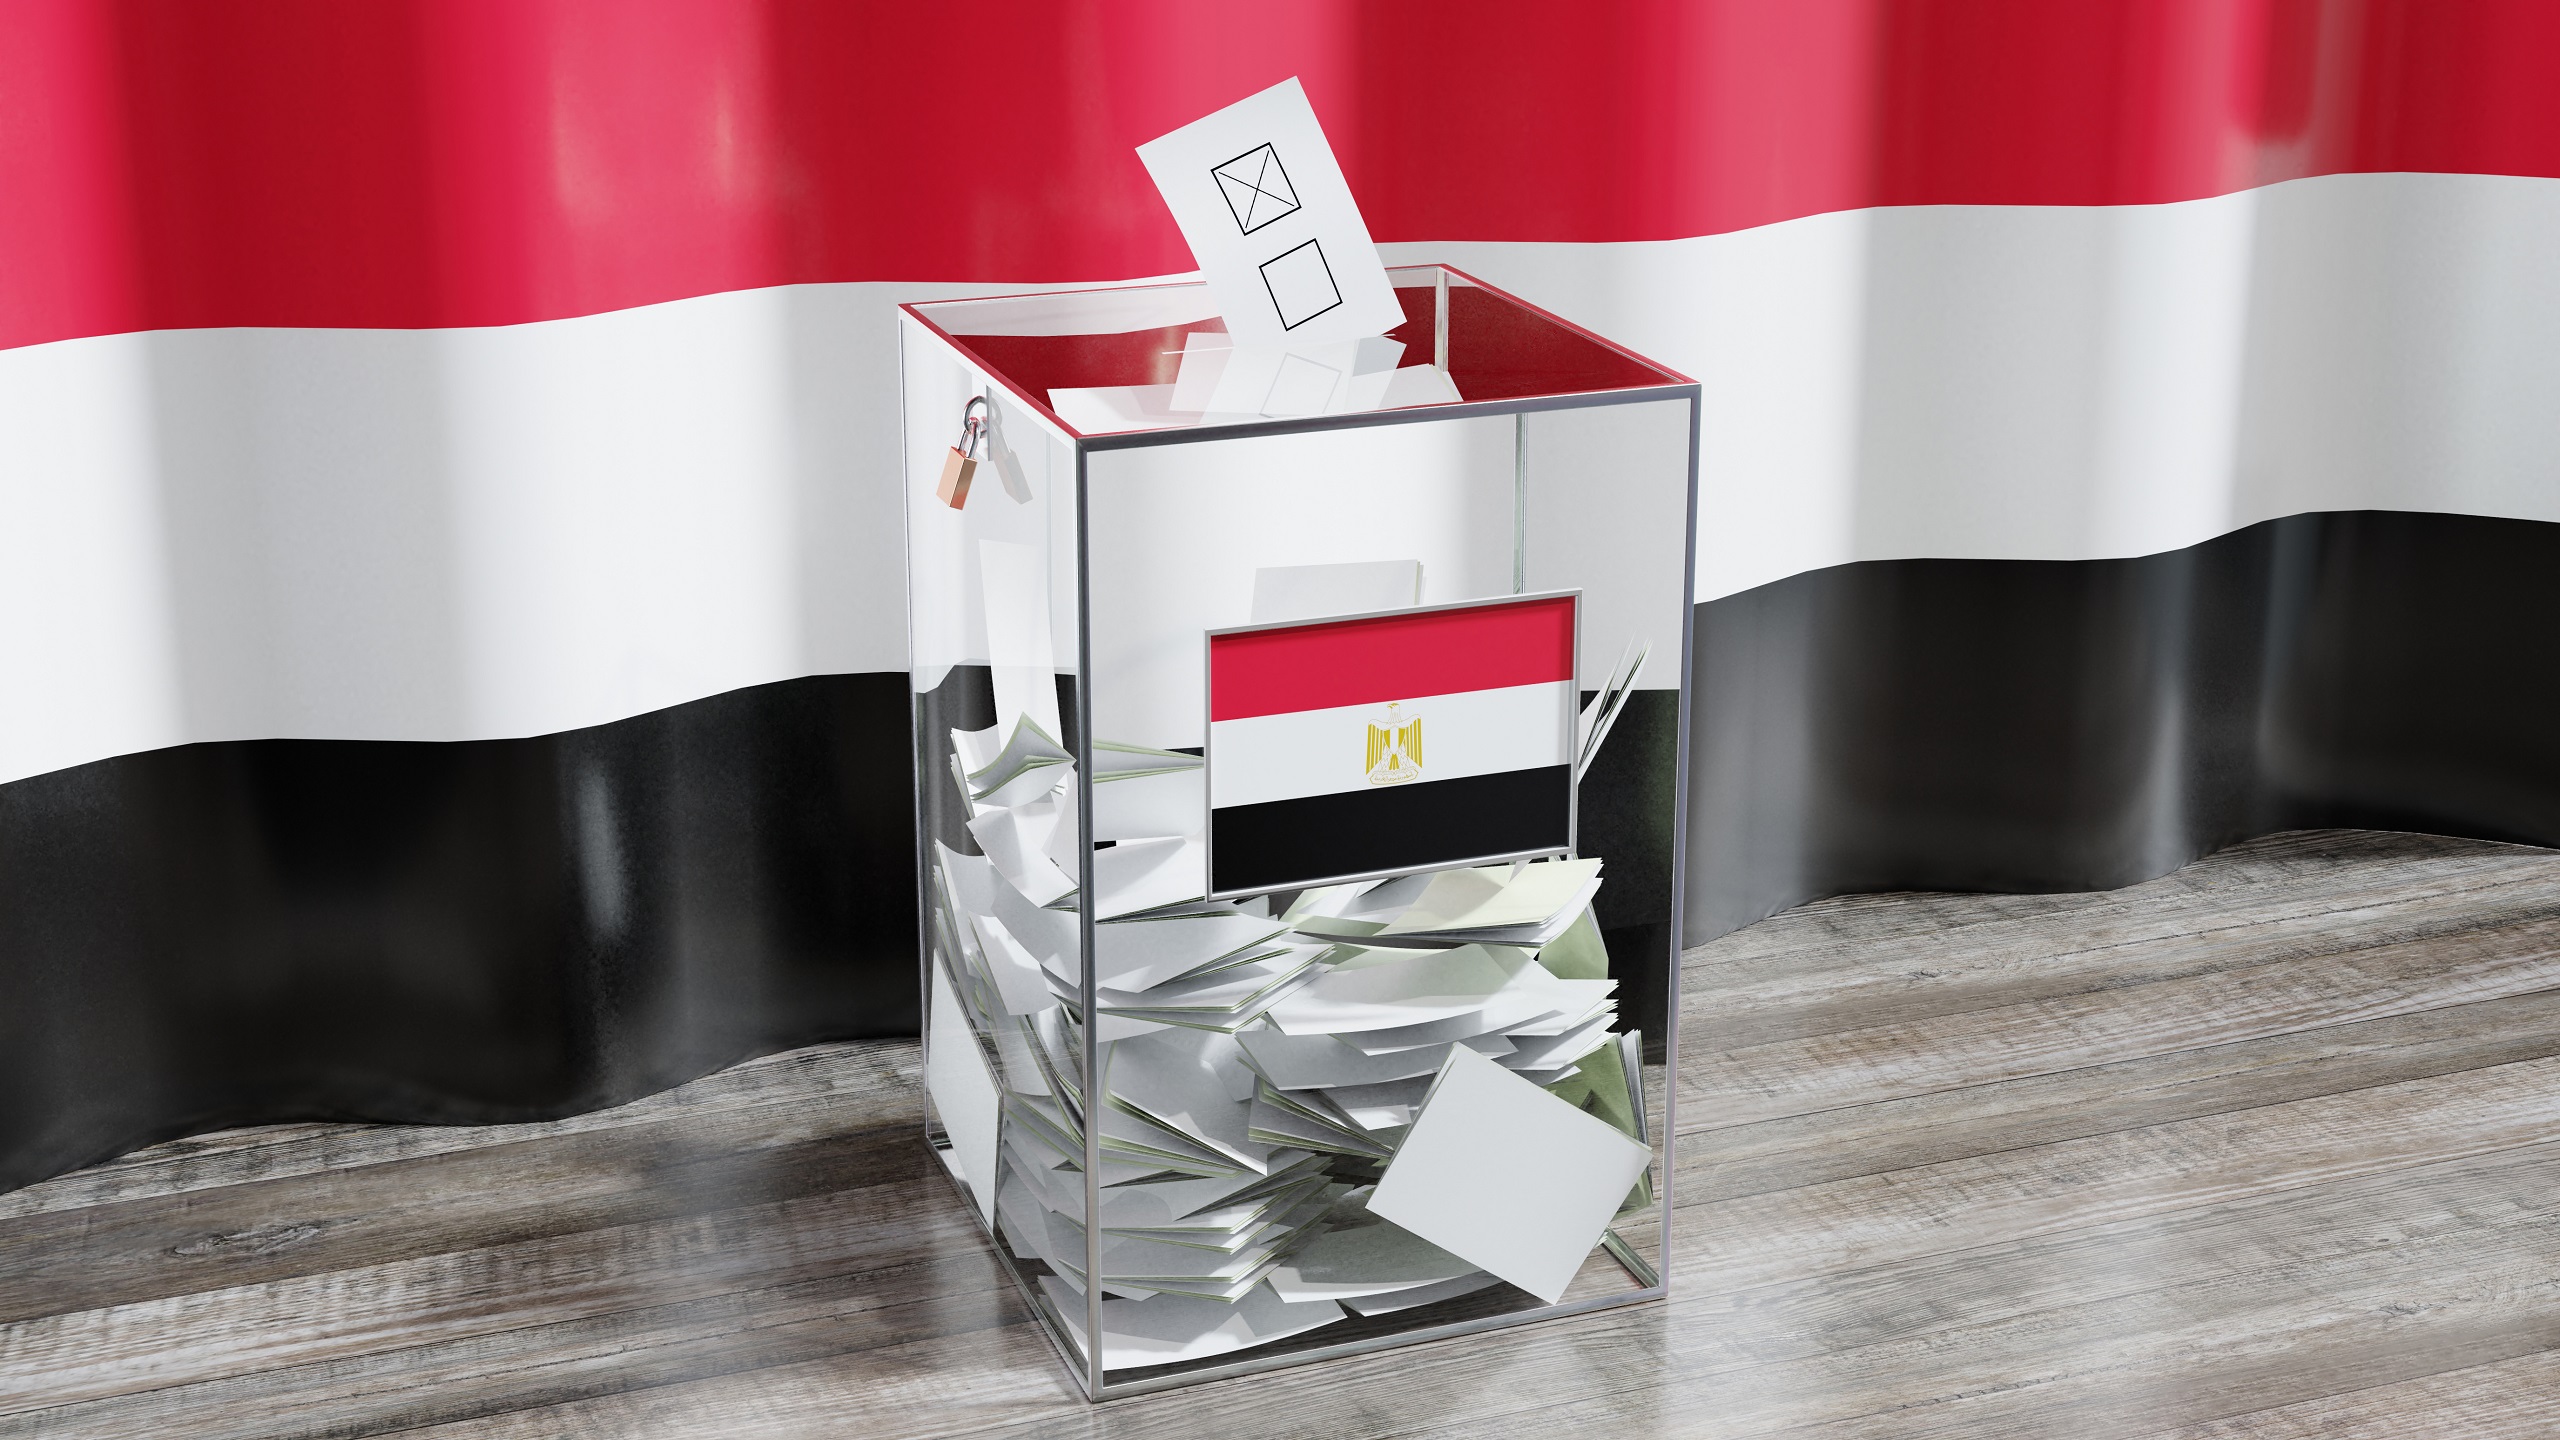 Egypt Sees Robust Voter Turnout in Presidential Election